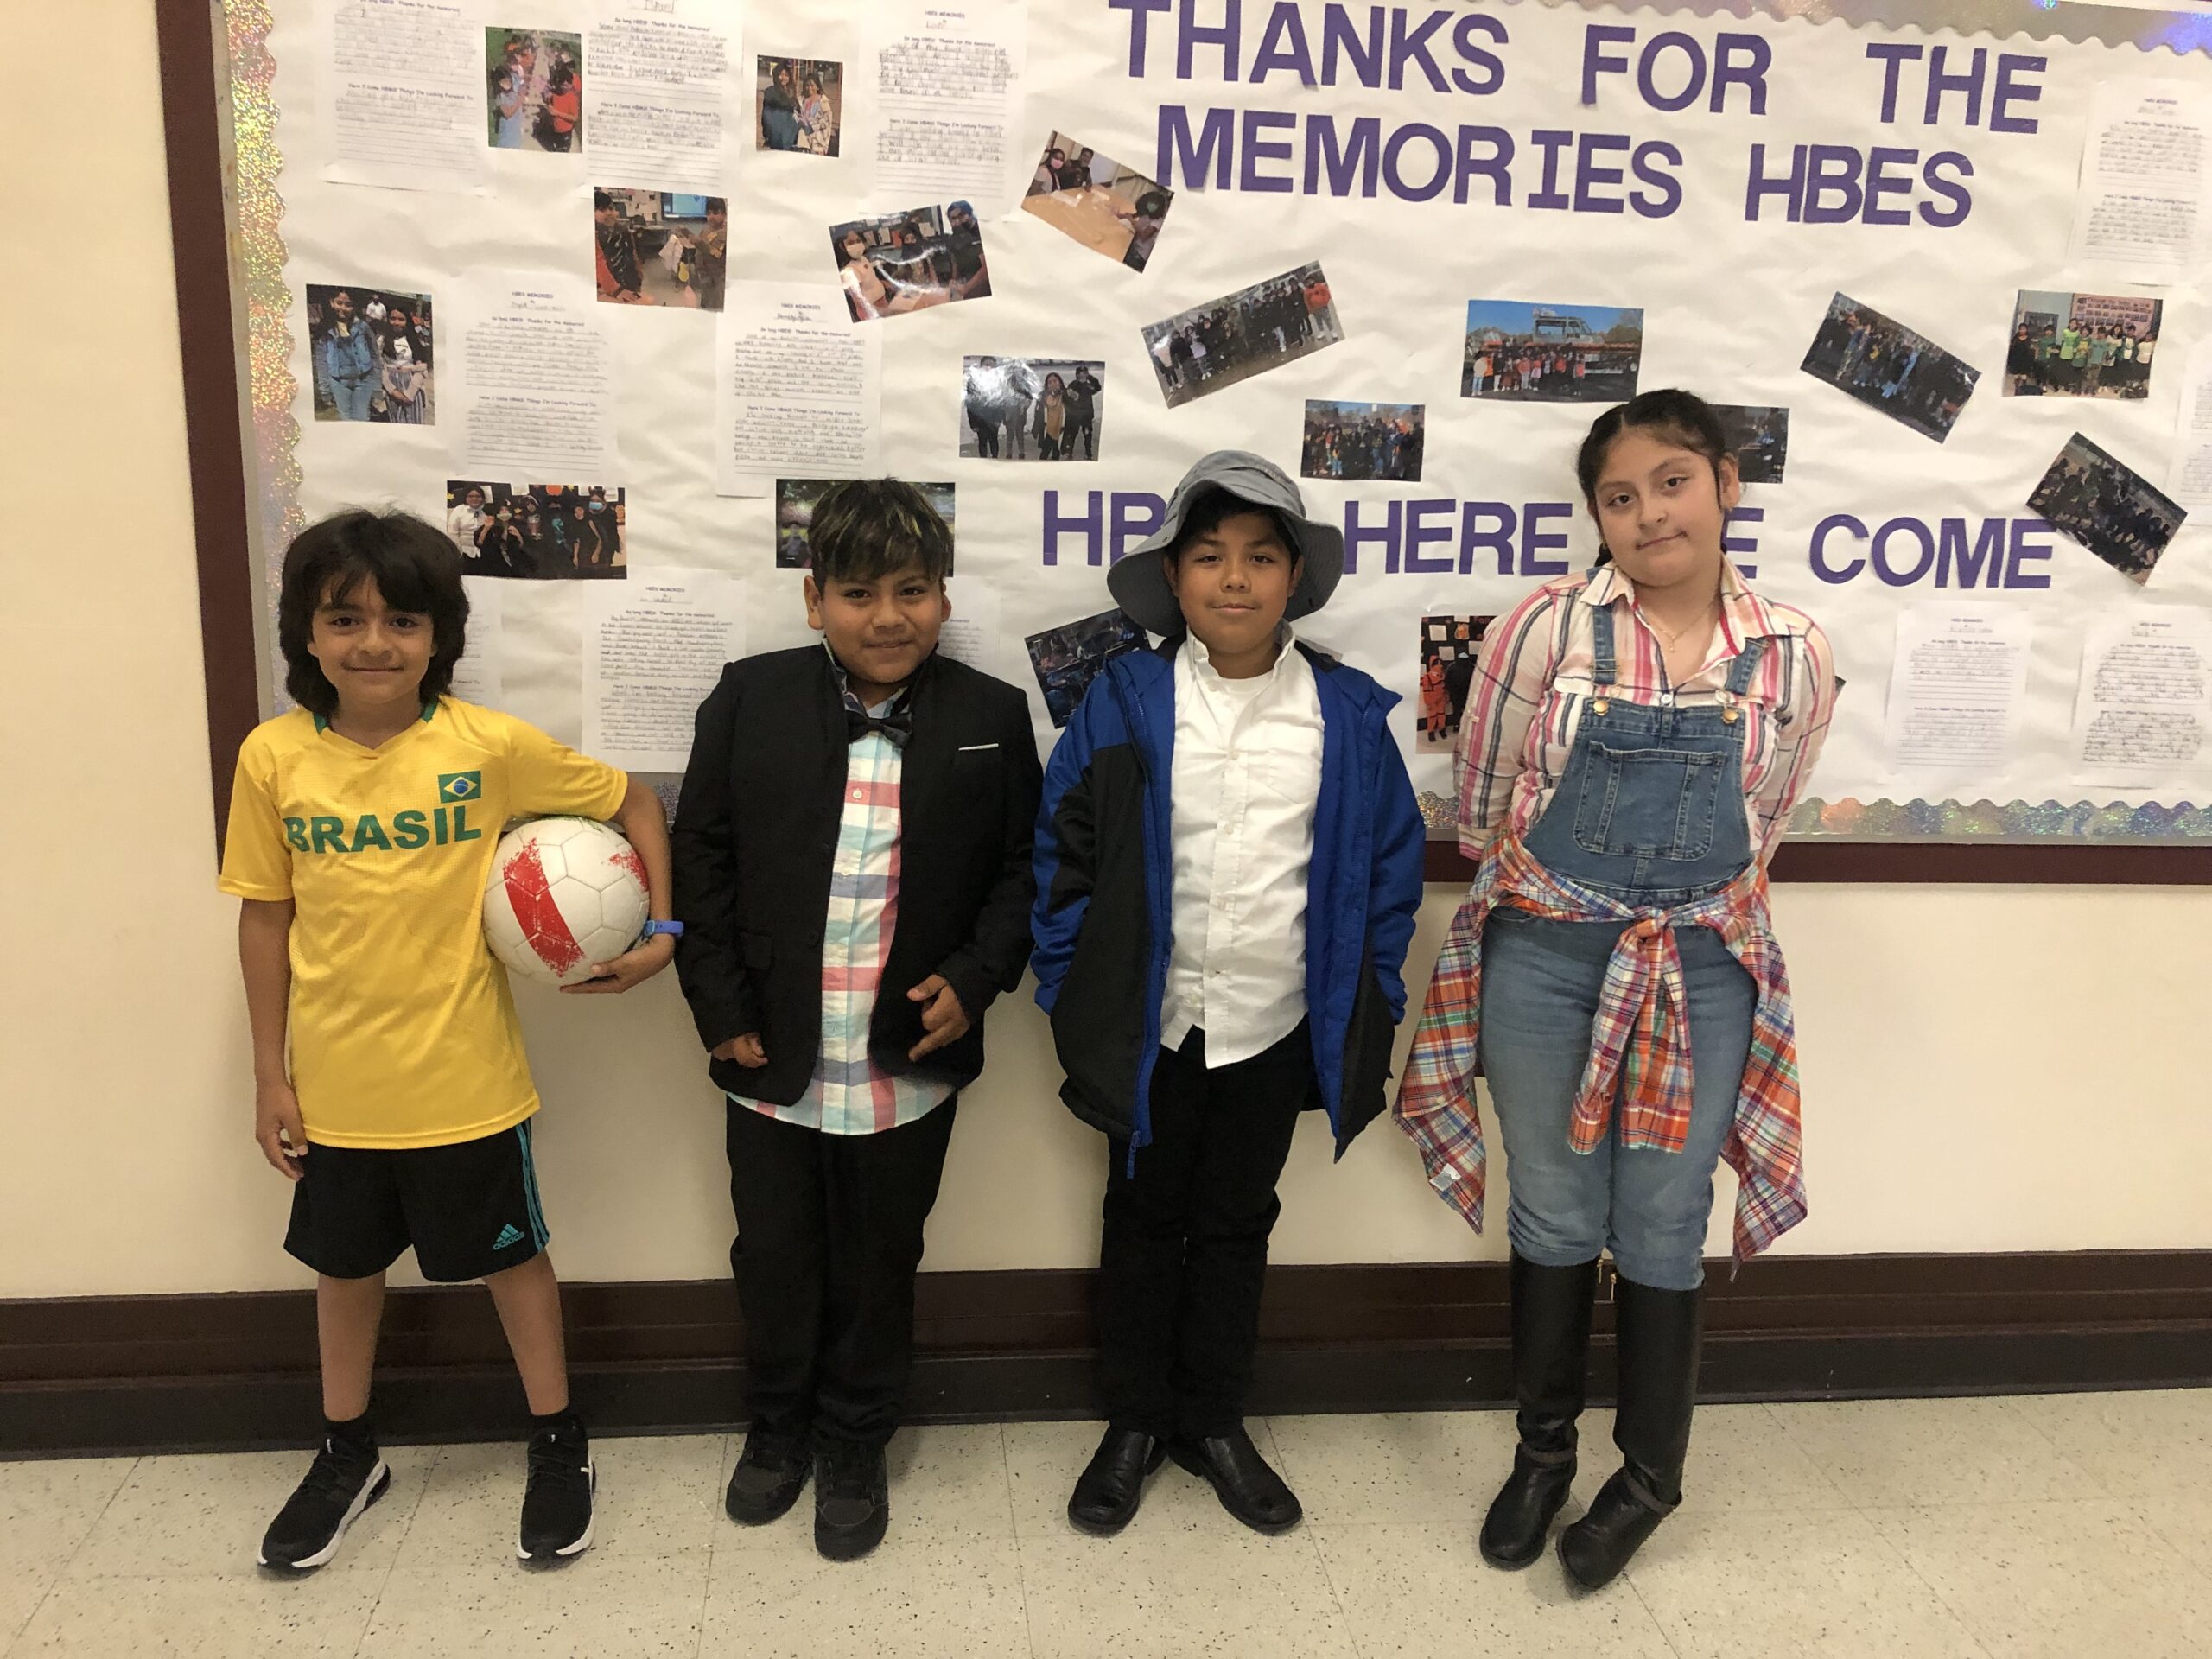 Hampton Bays Elementary School fourth grade students in Amy
McNamara’s class, including from left, Jayden Mejia, Israel Portrero, Leo Ferrufino and Emily Villalba, recently wrote biographies of famous people. The students researched a chosen individual, wrote a report, and then dressed up as that individual and presented in front of the class. Their subjects included famous soccer players, Harry Houdini, Paul Revere, Dolly Parton and Helen Keller. COURTESY HAMPTON BAYS SCHOOL DISTRICT